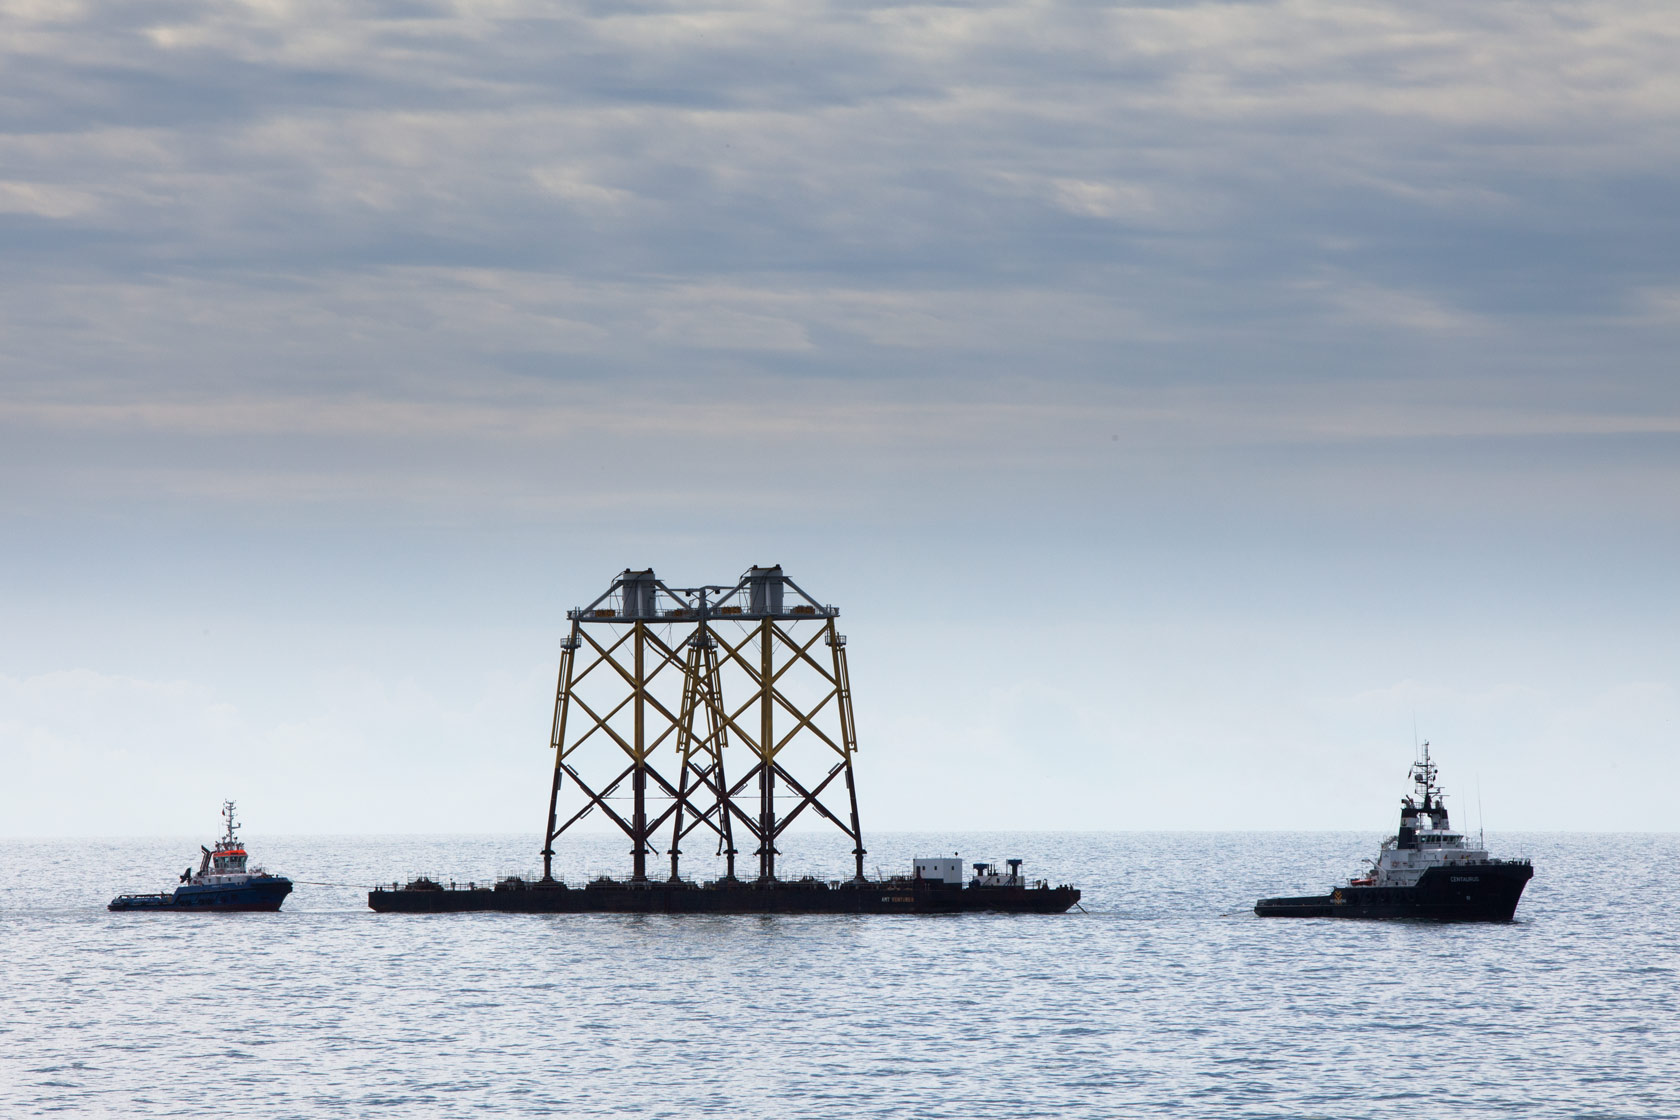 Two ships transporting jacket foundations for an offshore wind farm